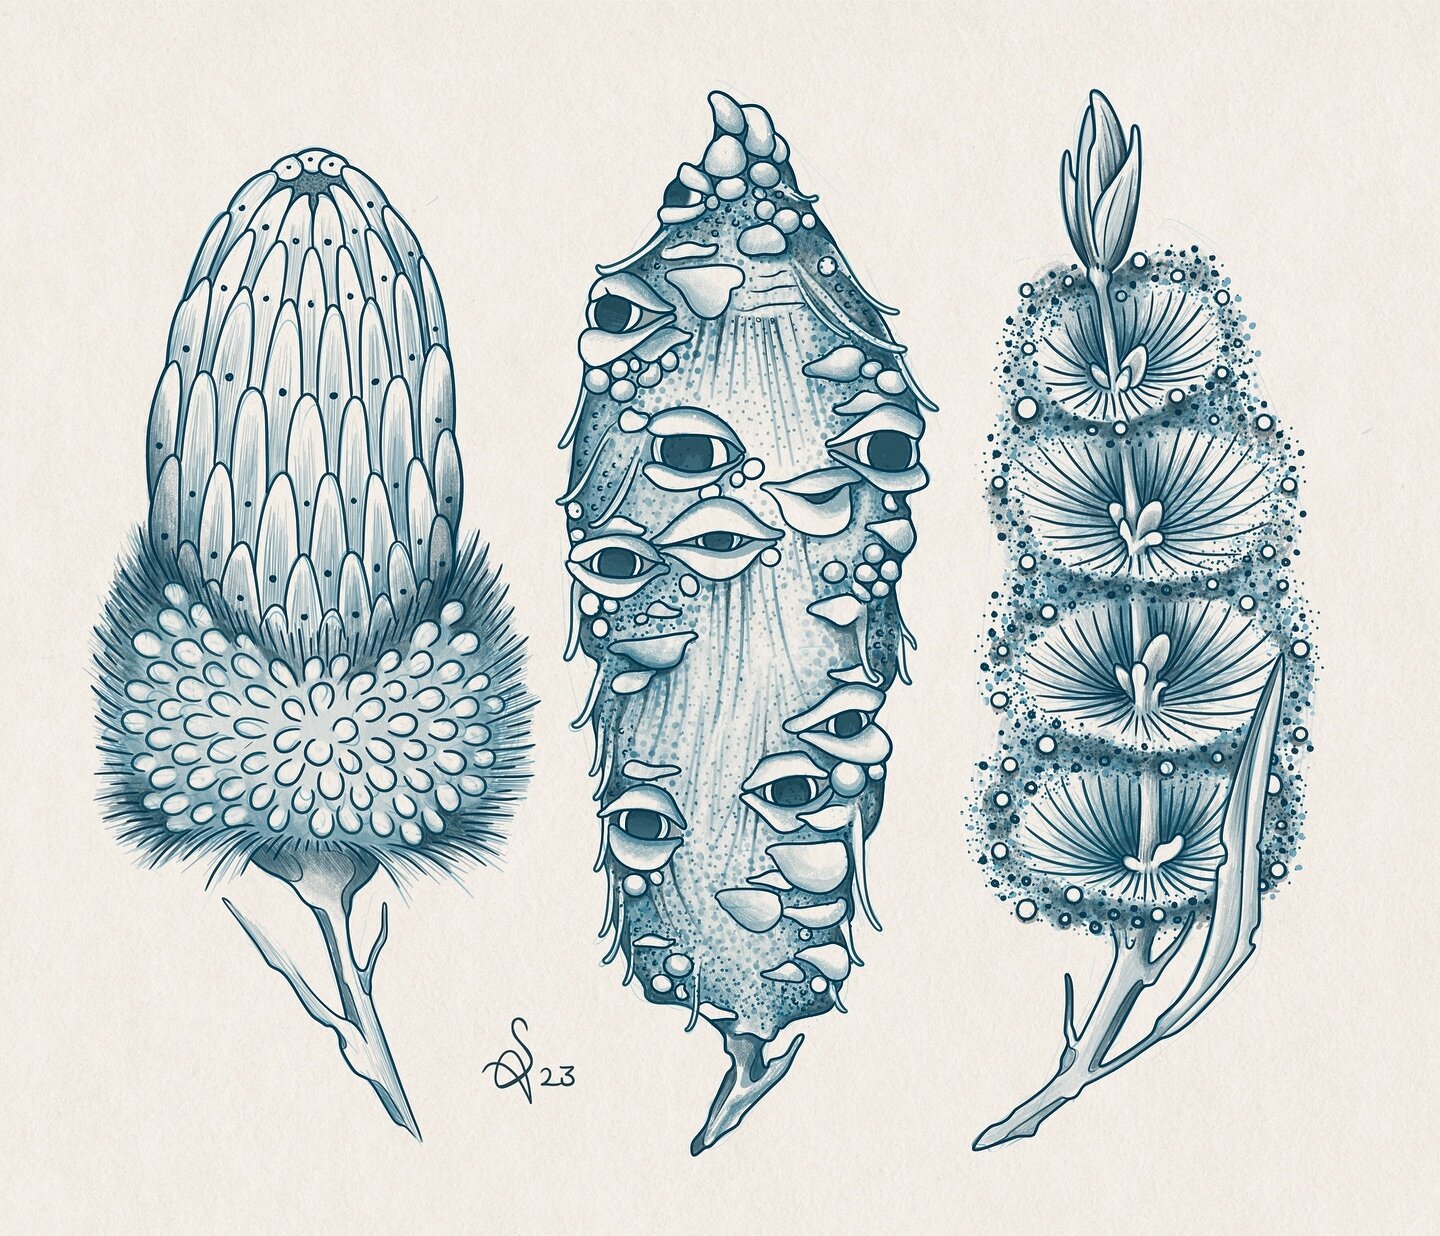 Some banksia and bottlebrush sketches up for grabs 🤍
For bookings/enquiries send me a DM or email: s.amaterstein@gmail.com

.
.
.
.
.
#amatersteinart #availabledesigns #botanical #botanicaltattoo #australiannatives #banksia #bottlebrush #tattooflash